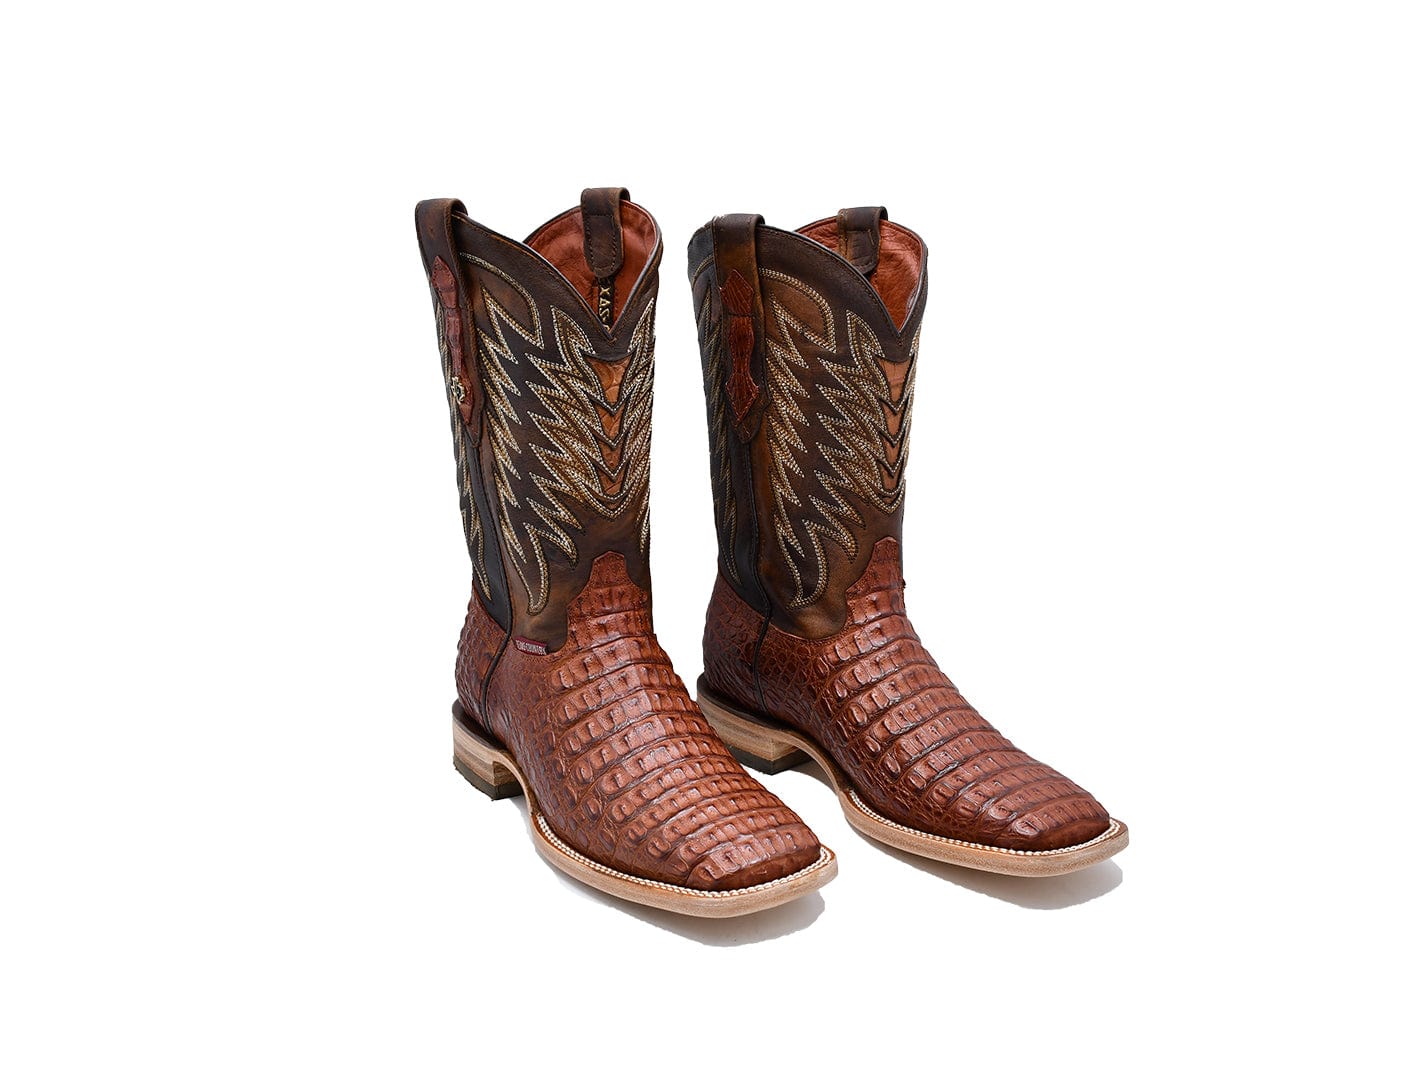 Texas Country Exotic Boot Lomo Caiman Brandy Square Toe LM10B